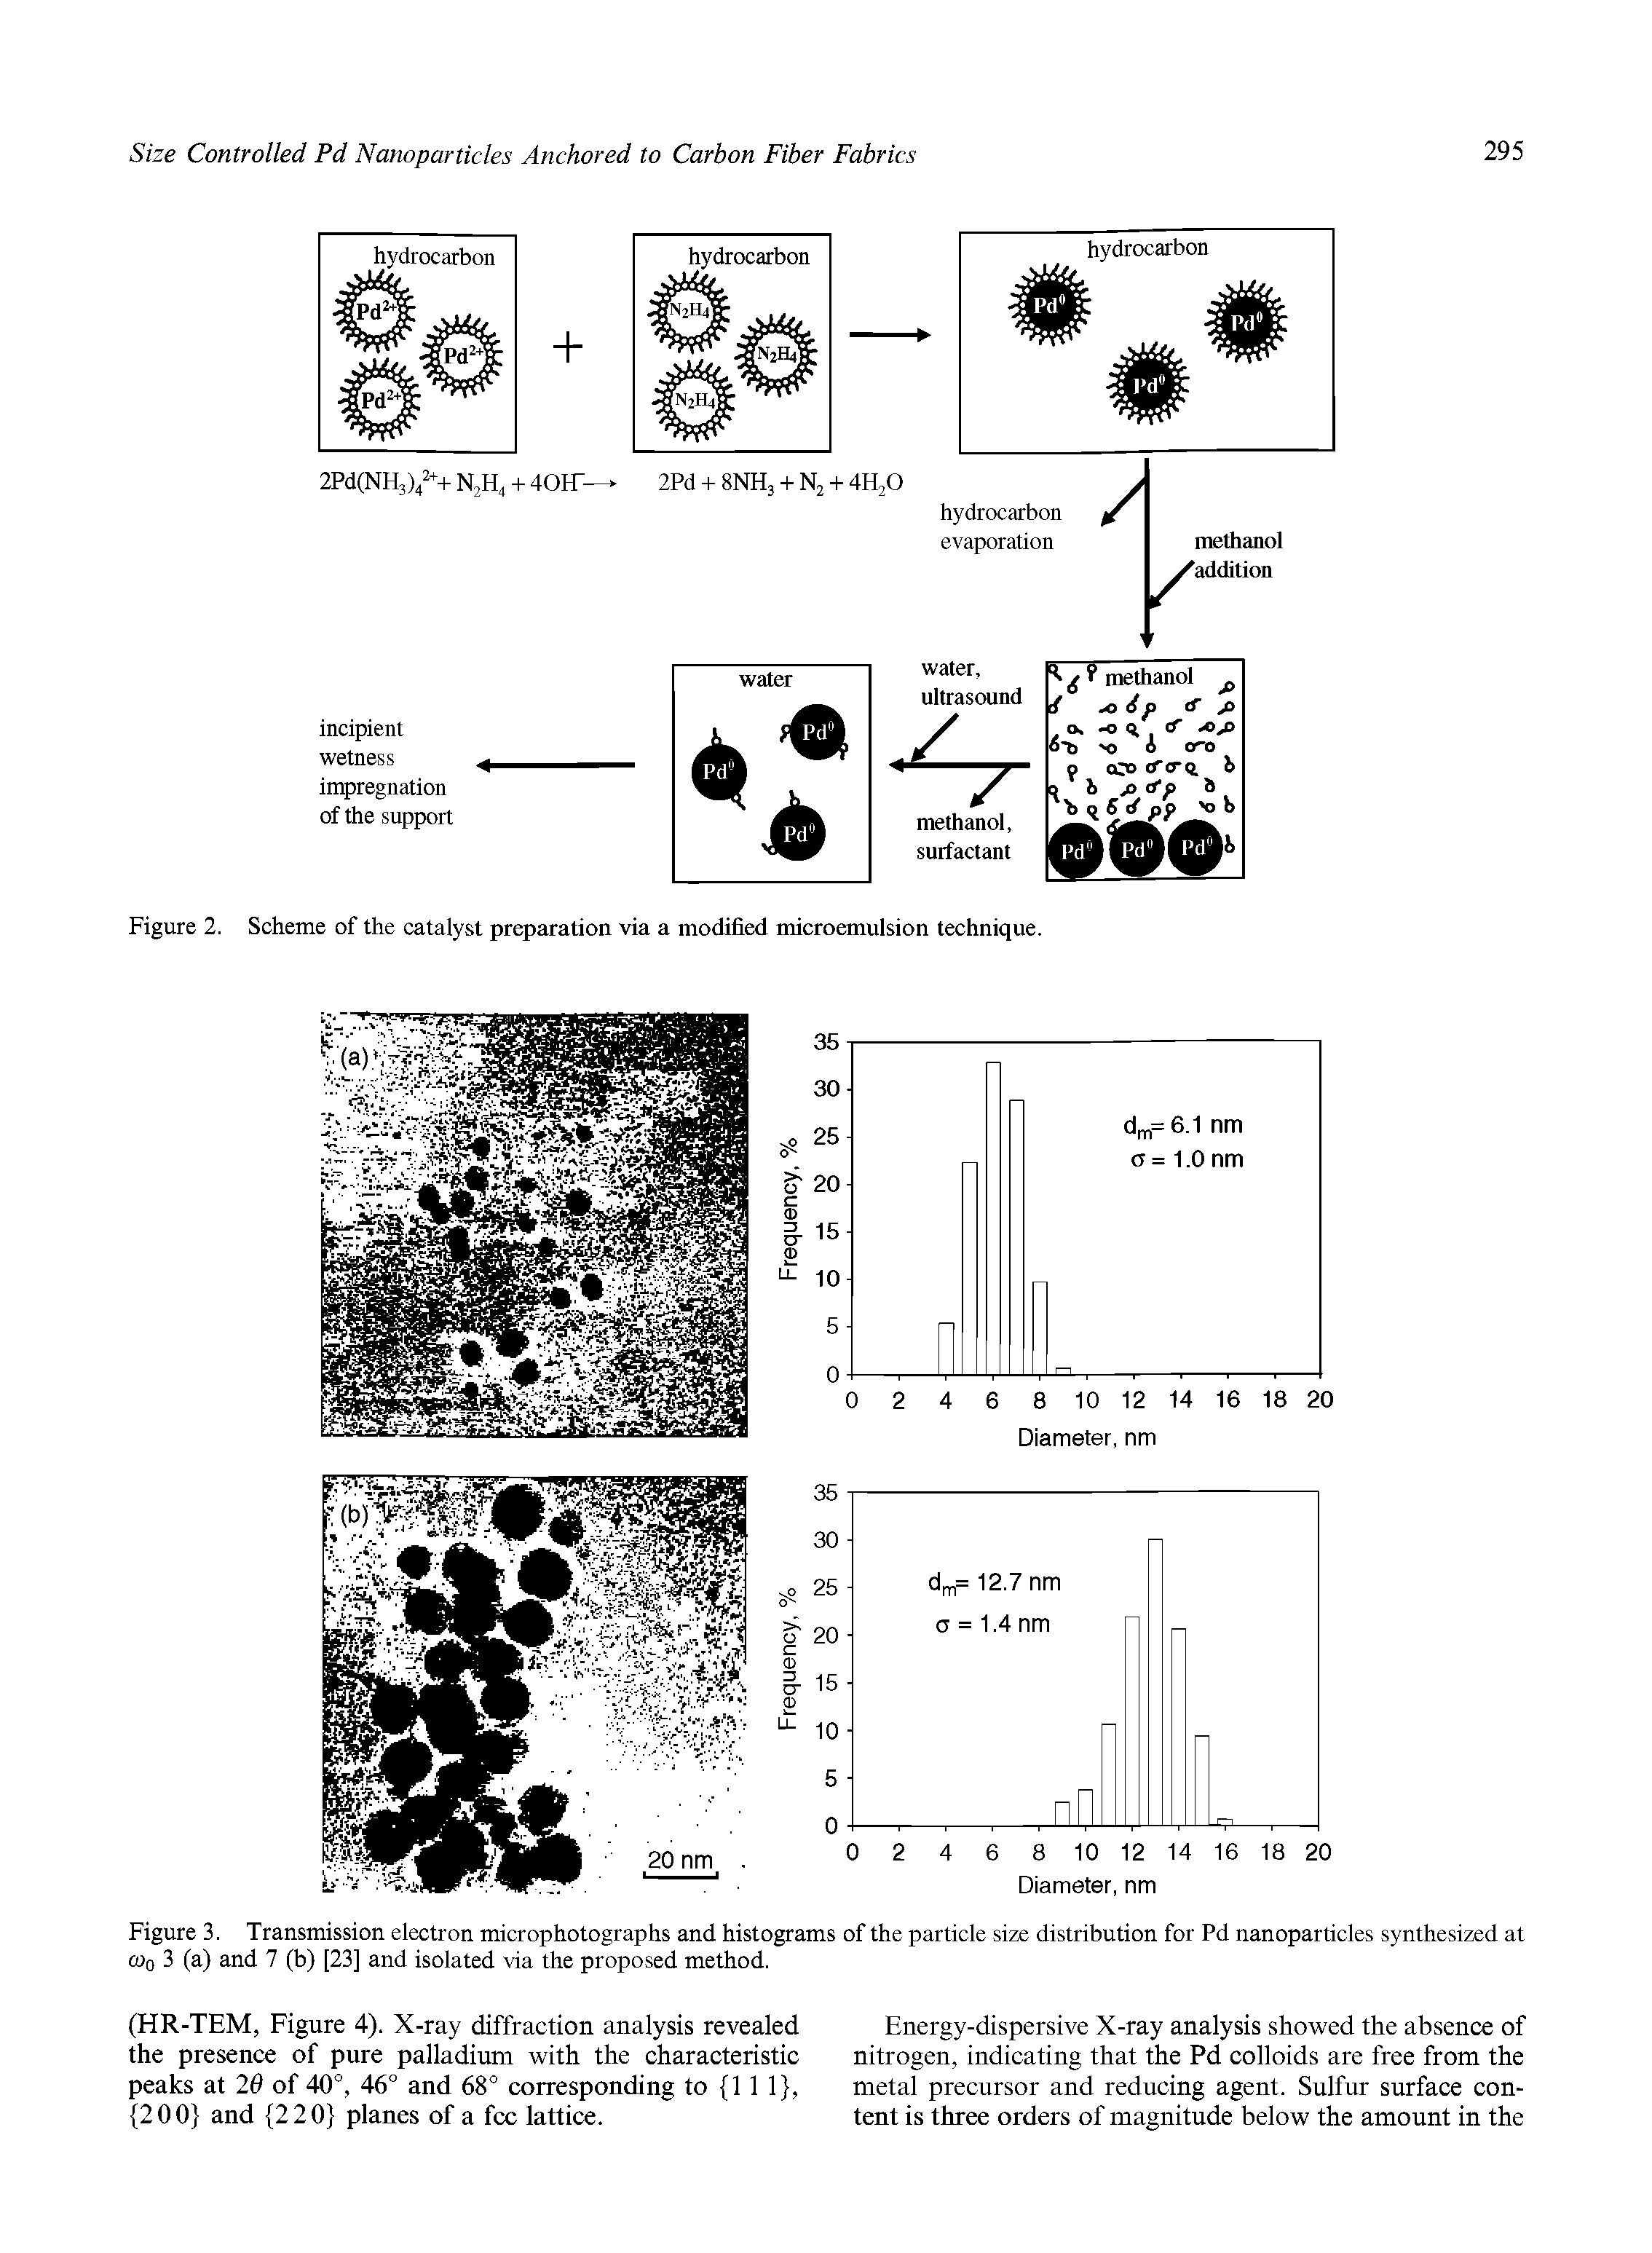 Figure 3. Transmission electron microphotographs and histograms of the particle size distribution for Pd nanoparticles synthesized at Wo 3 (a) and 7 (b) [23] and isolated via the proposed method.